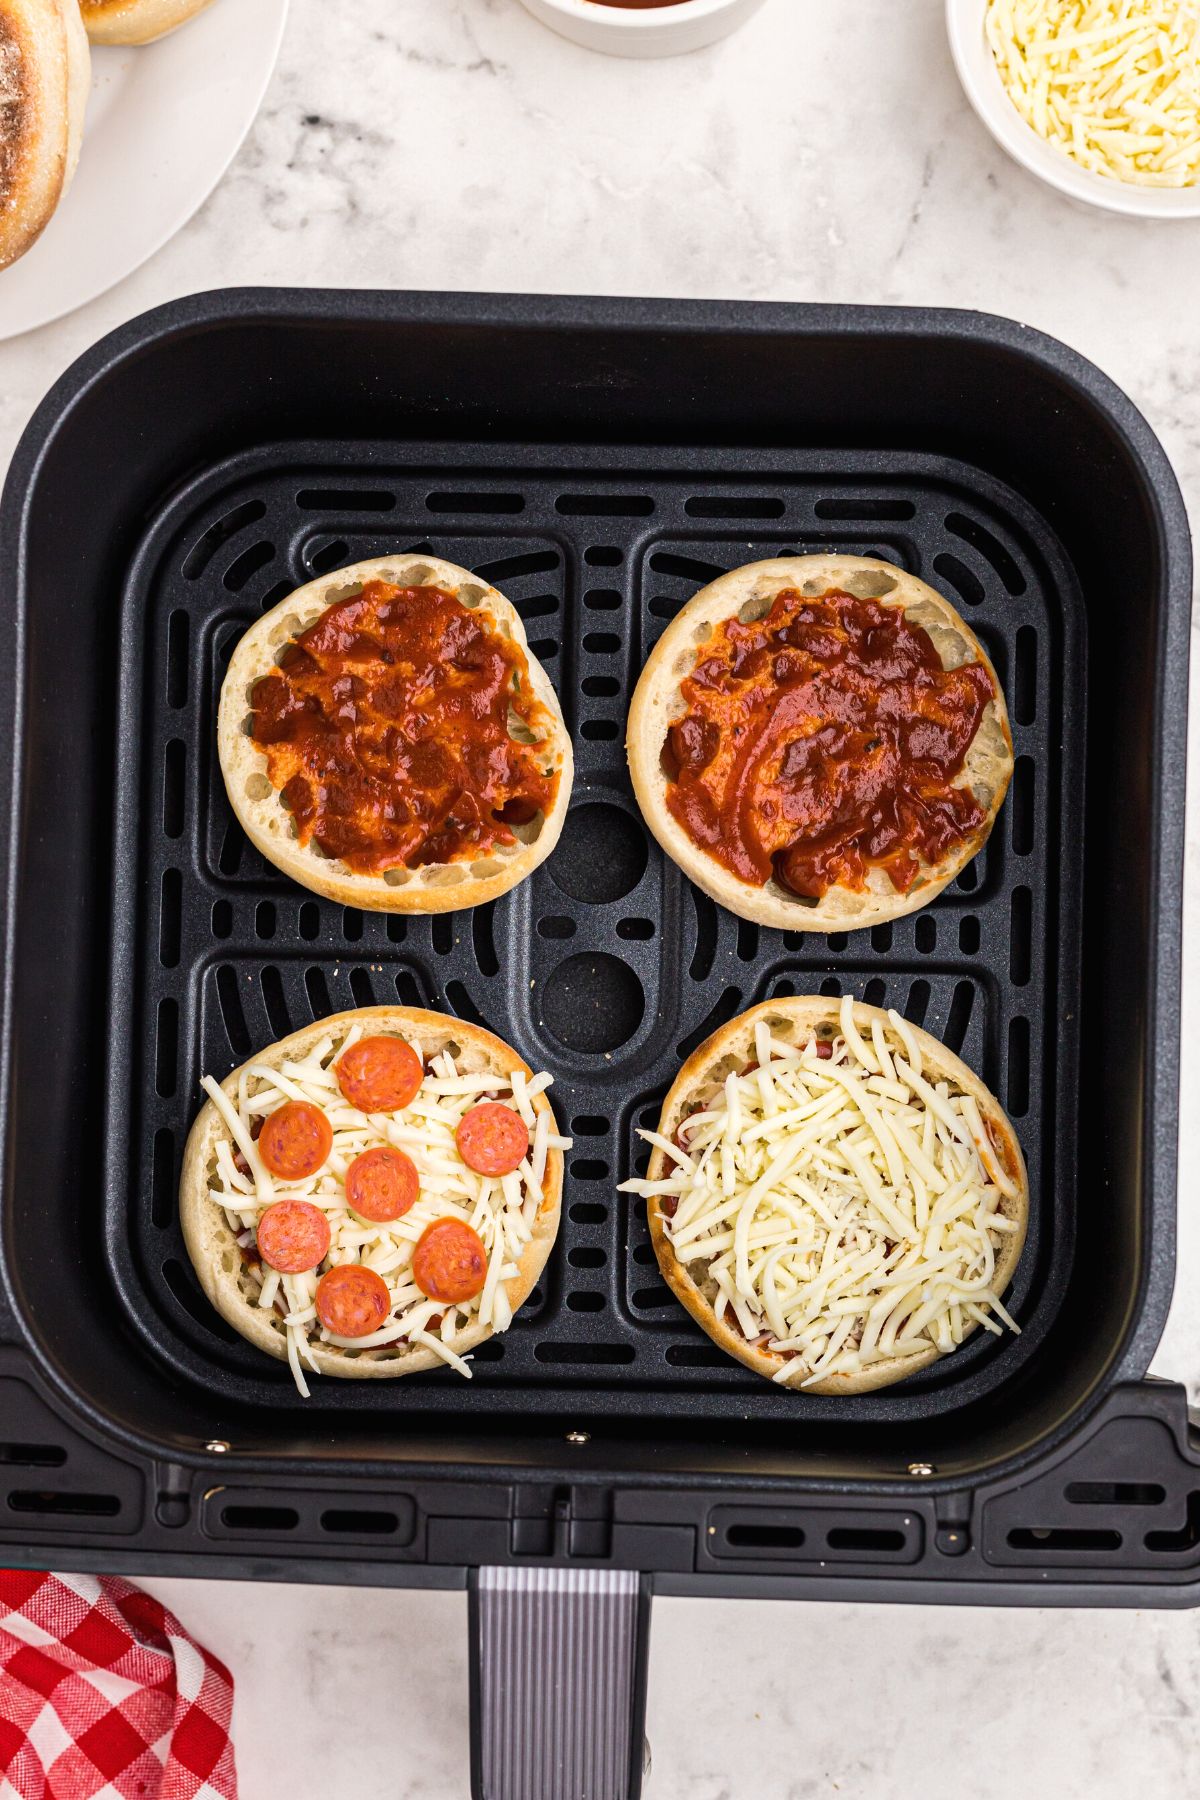 English muffin halves in the air fryer basket, topped with sauce, cheese, and pepperonis.